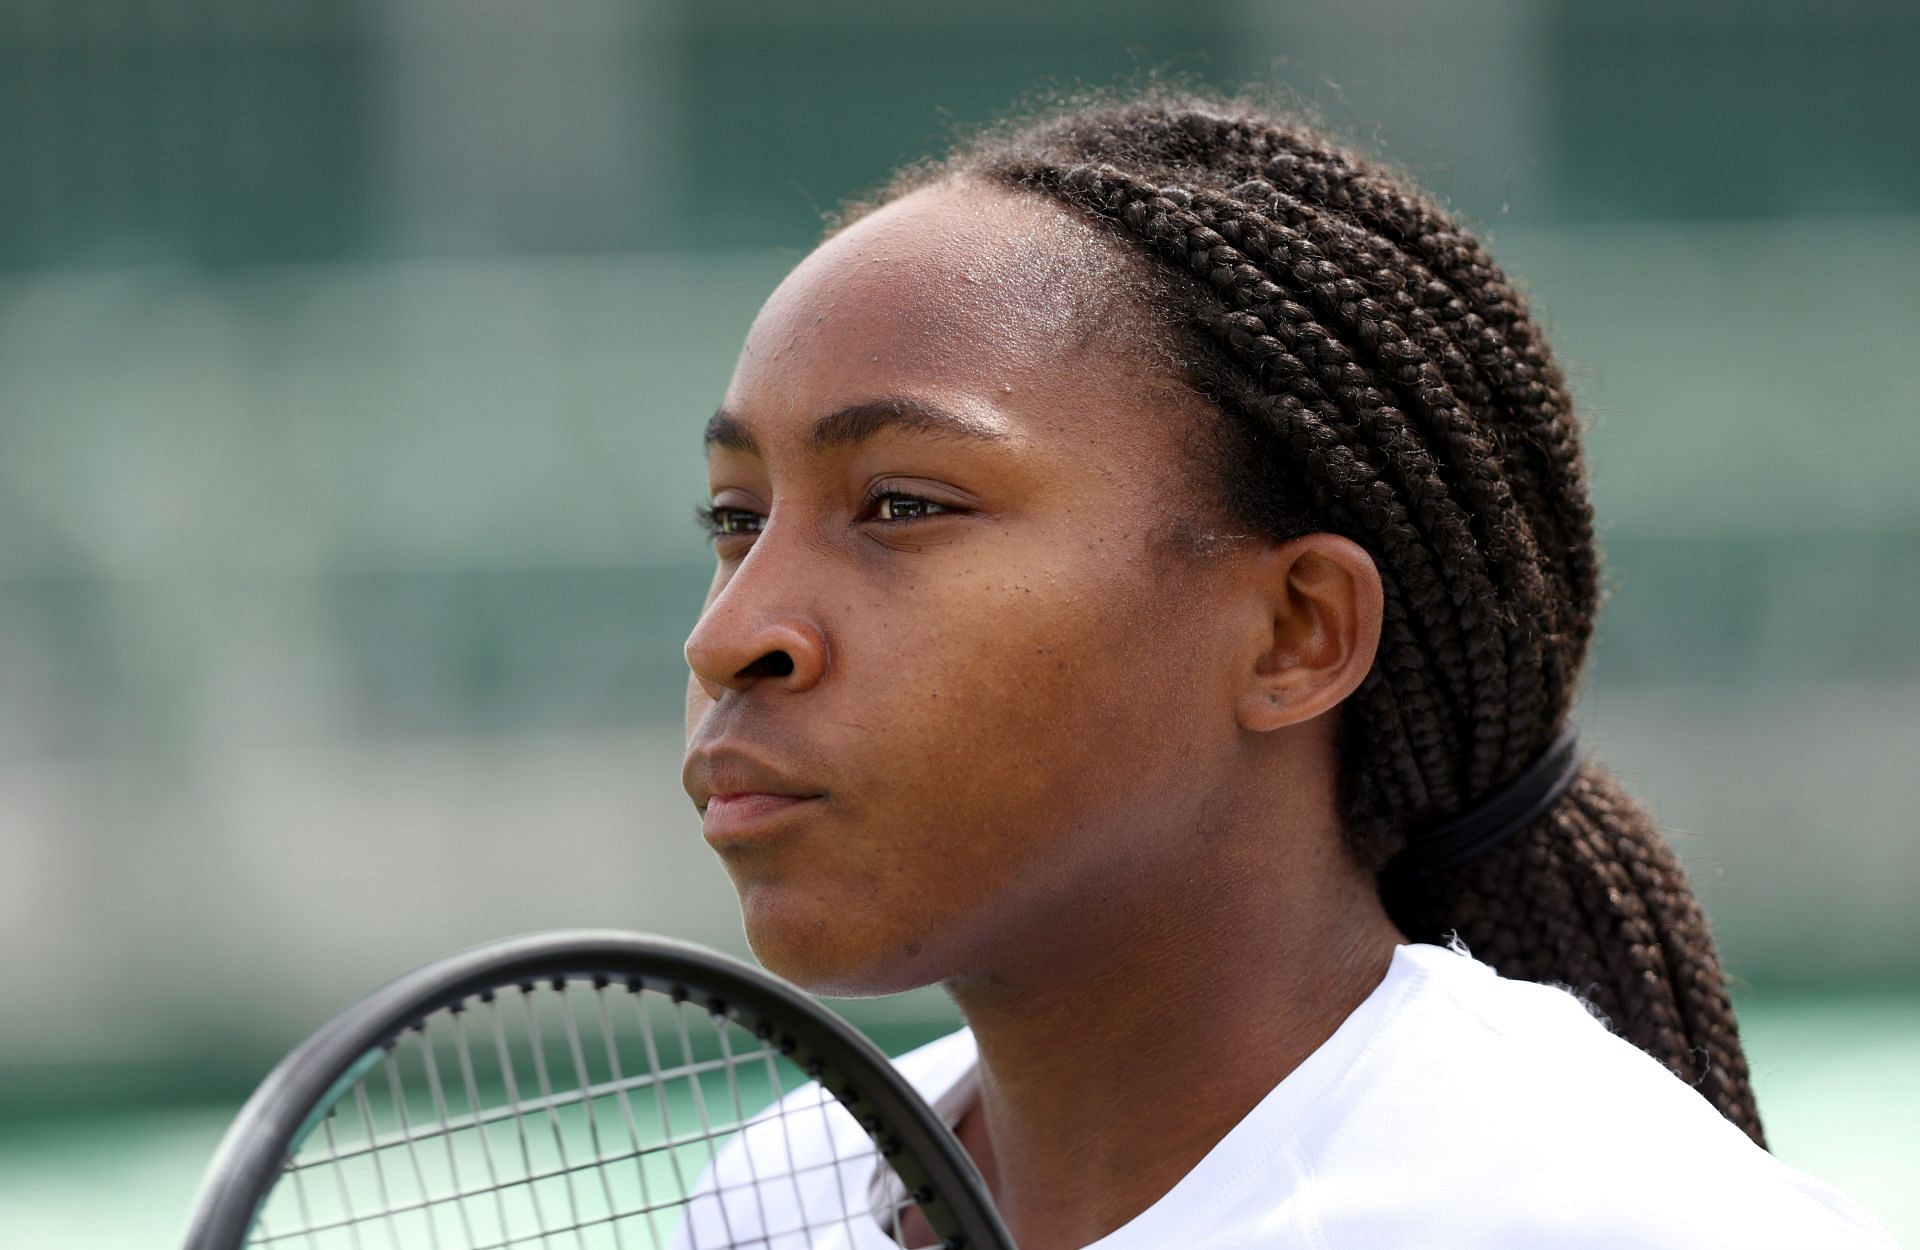 Gauff looks on during a practice session at Wimbledon 